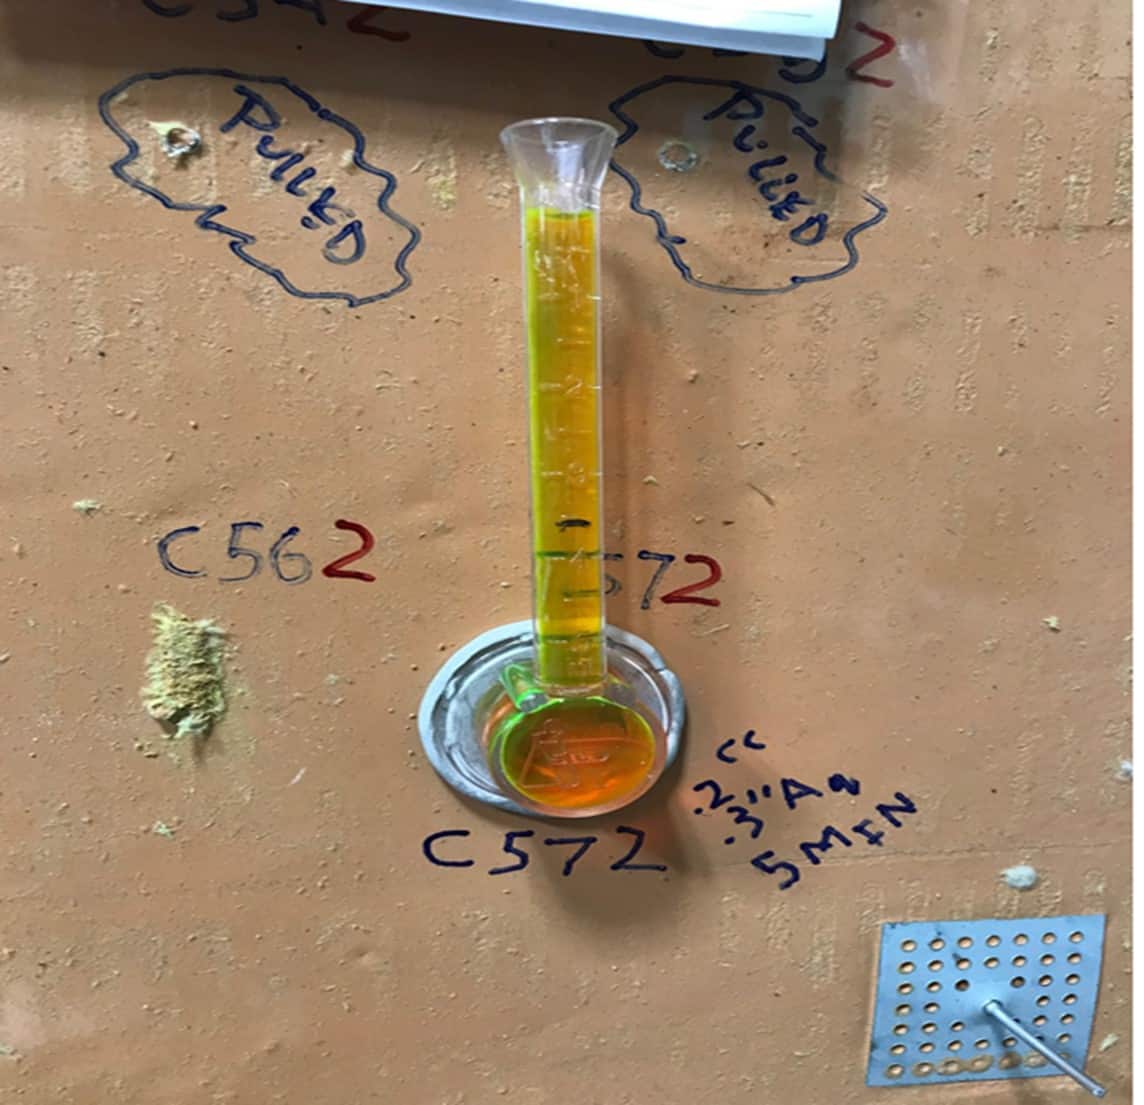 Figure 24.
Water testing with dye of the newly sealed hole was performed.
